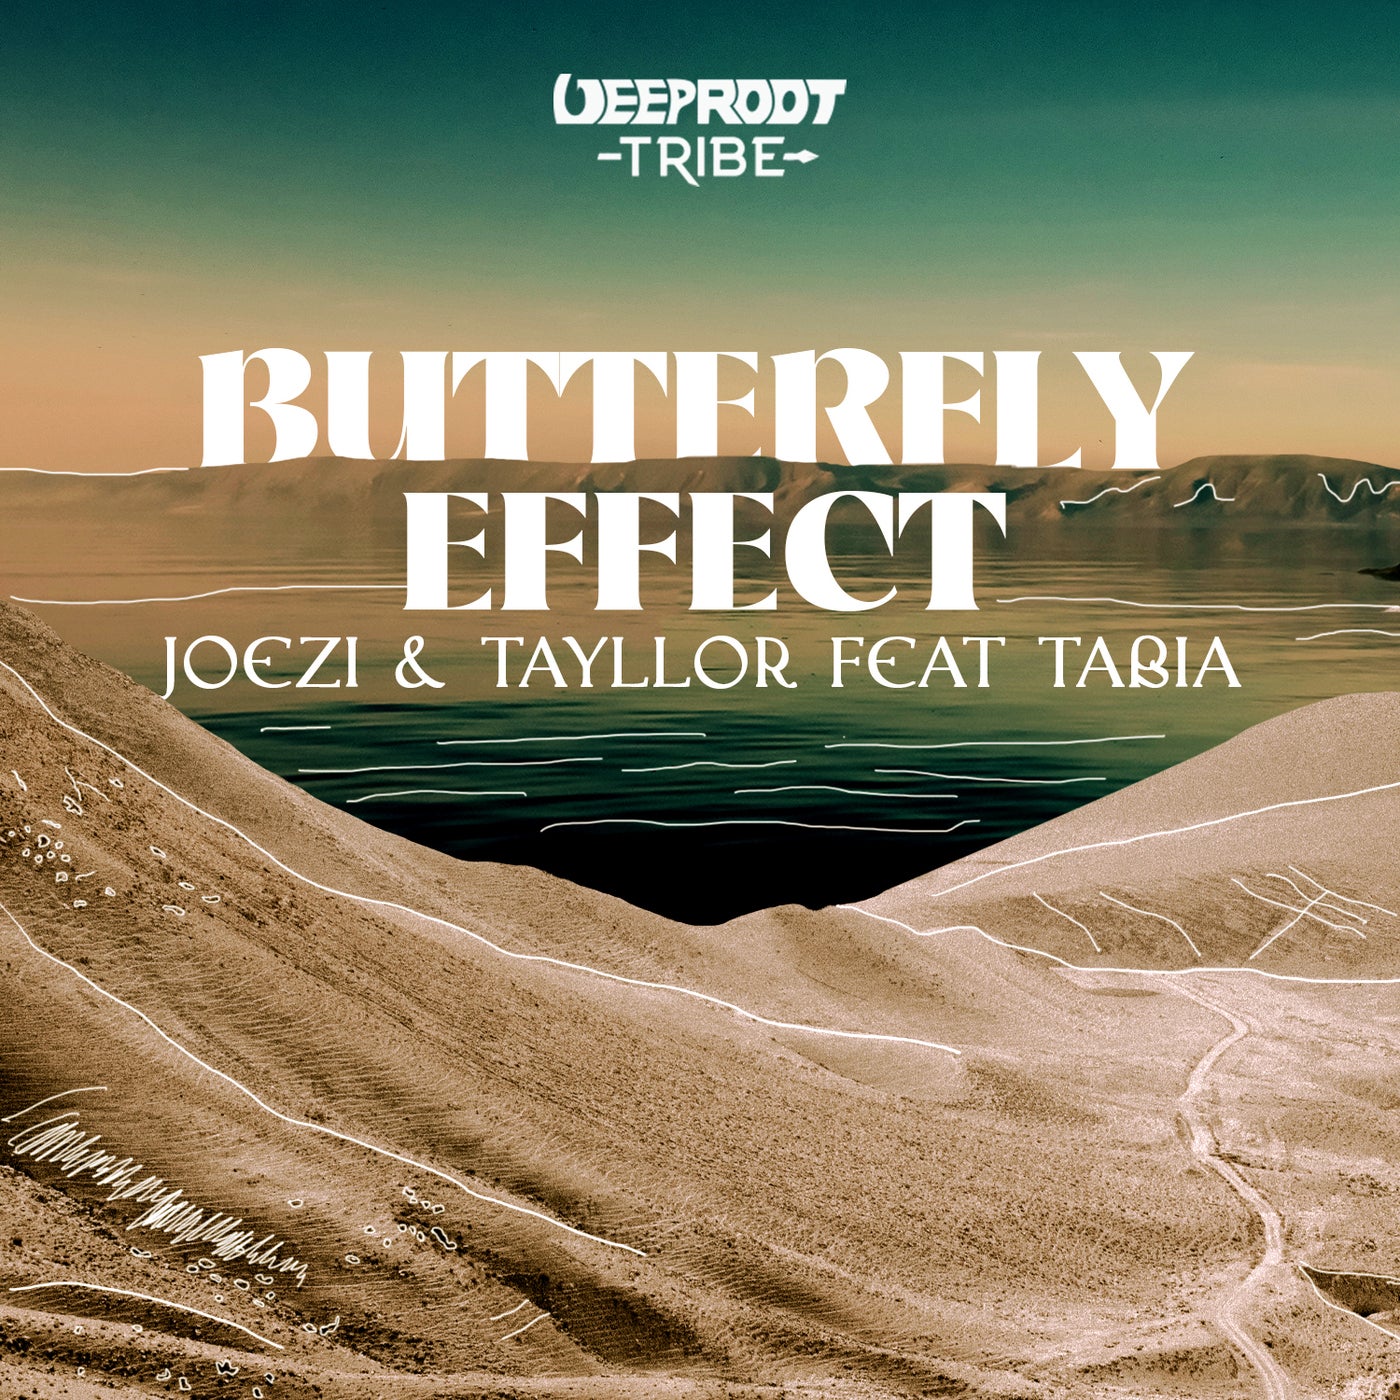 image cover: Tabia, Tayllor, Joezi - Butterfly Effect on Deep Root Tribe